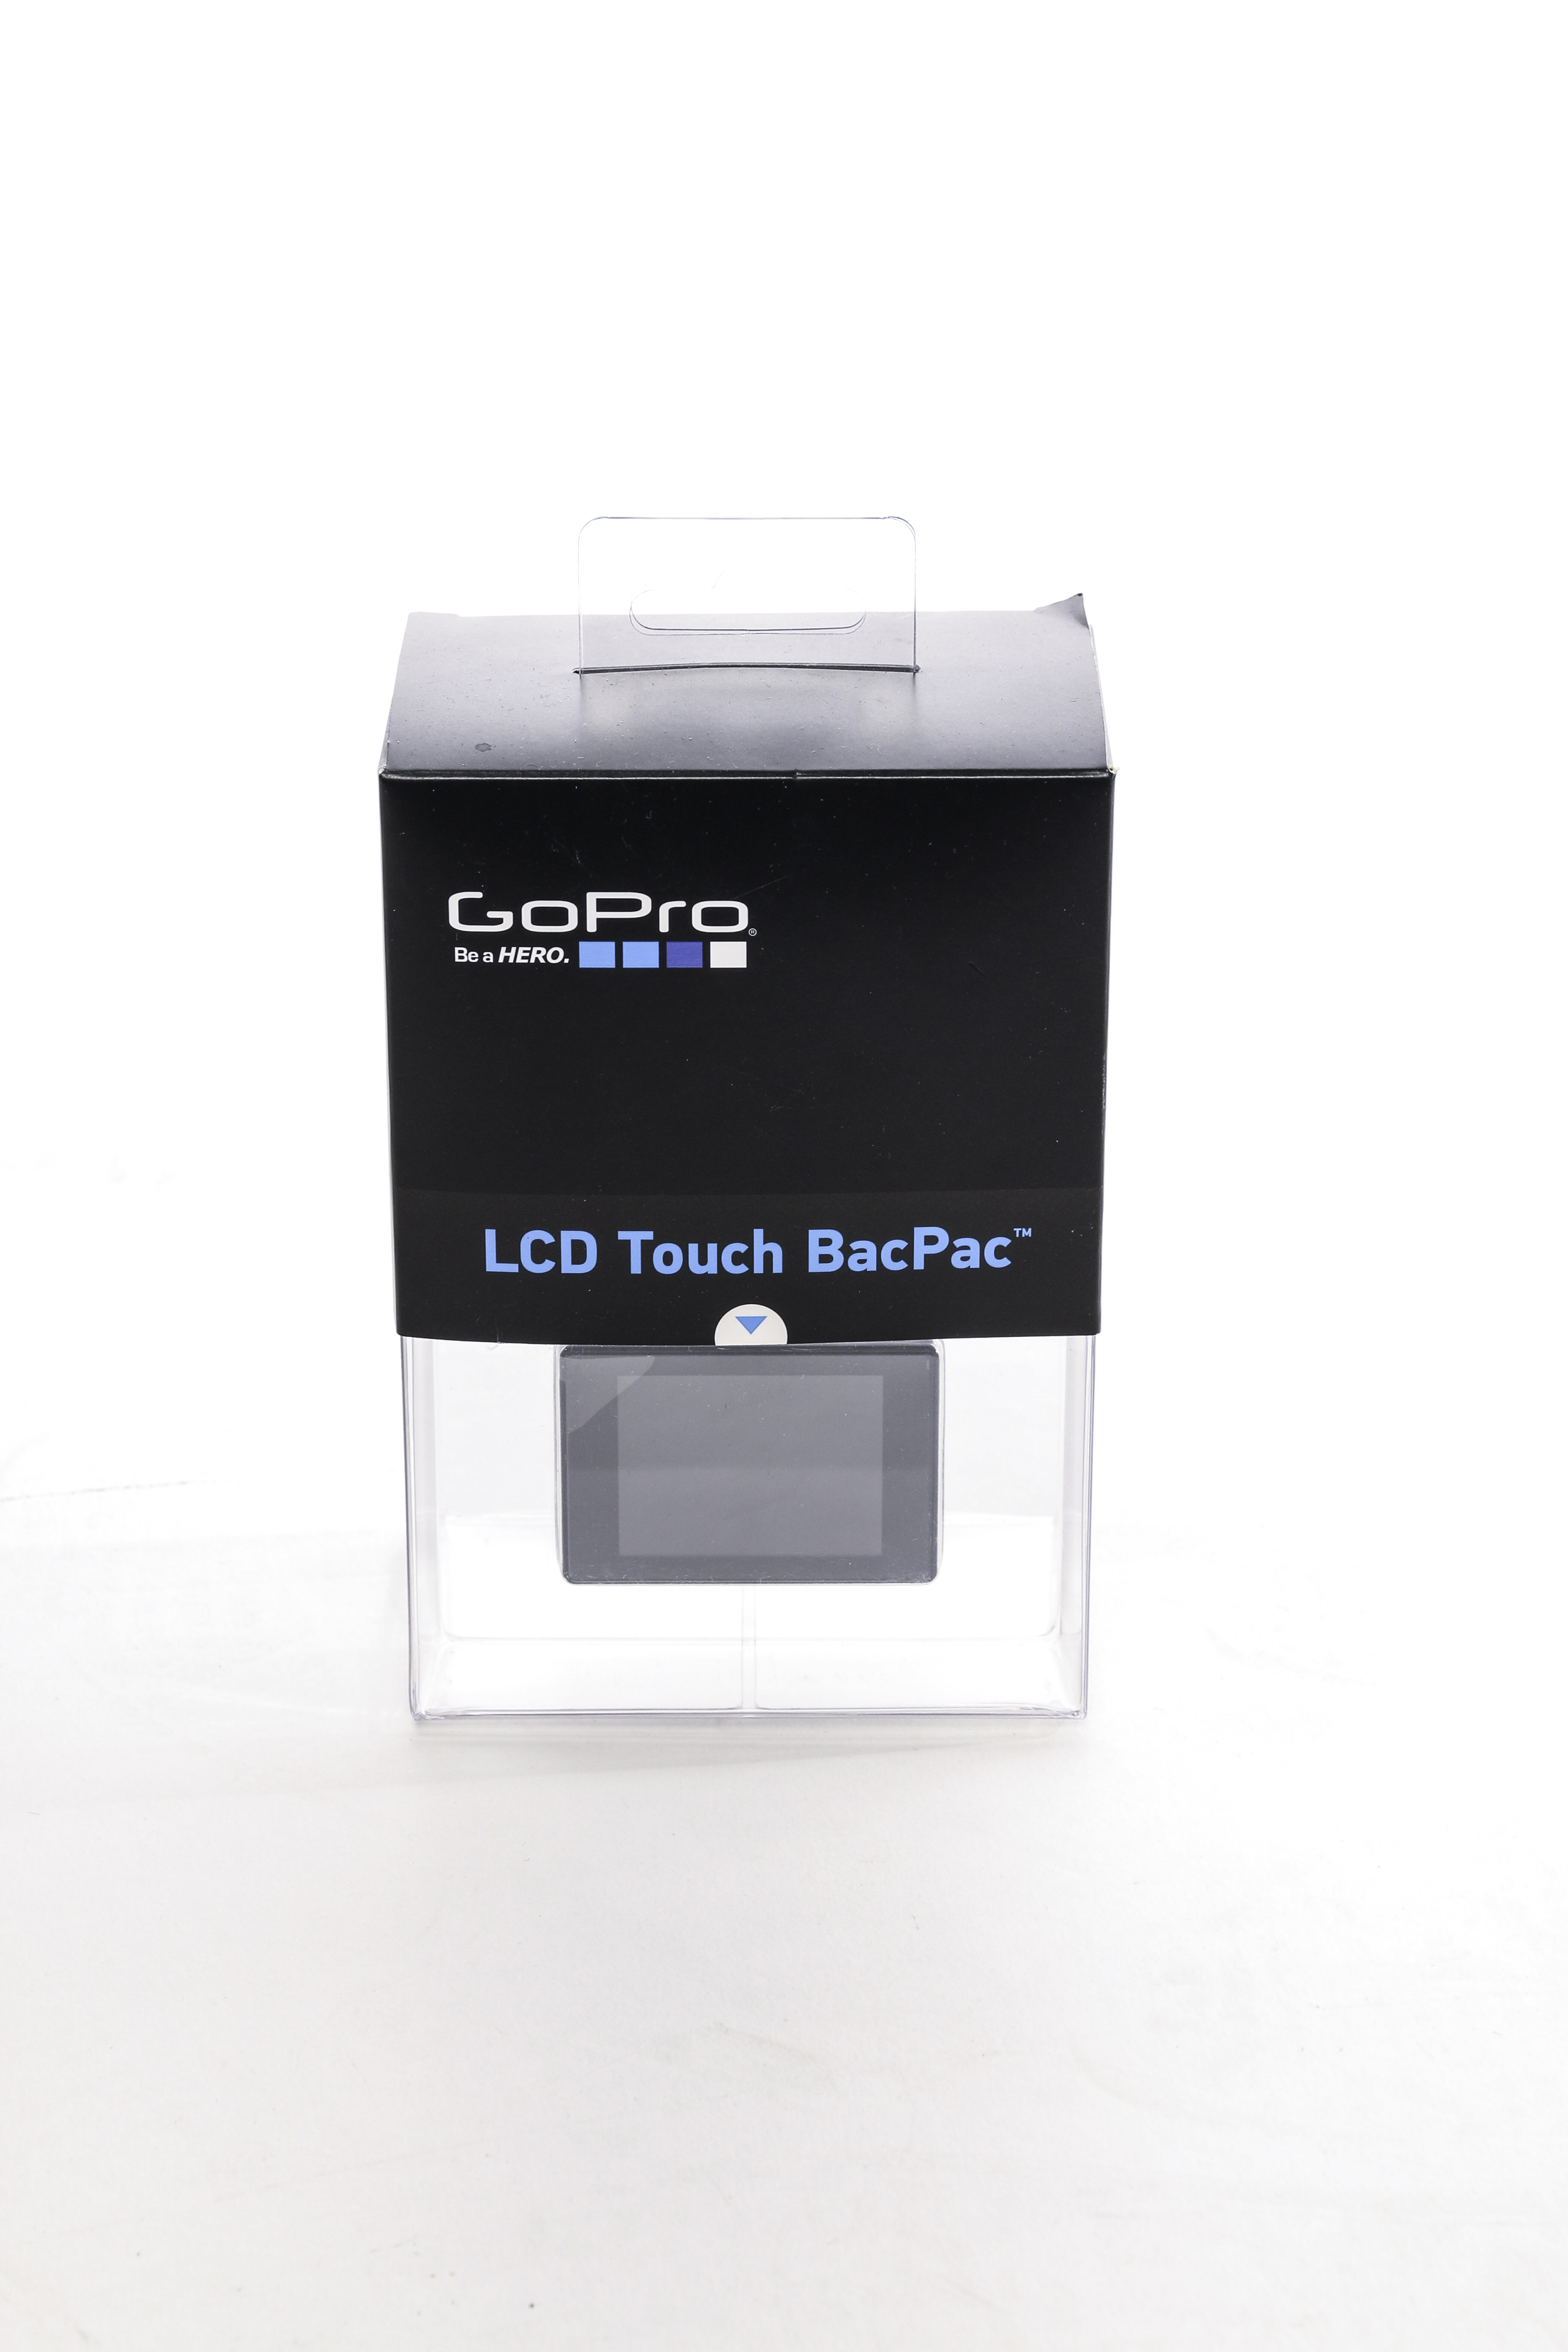 GoPro LCD Touch BacPac (Abverkauf)